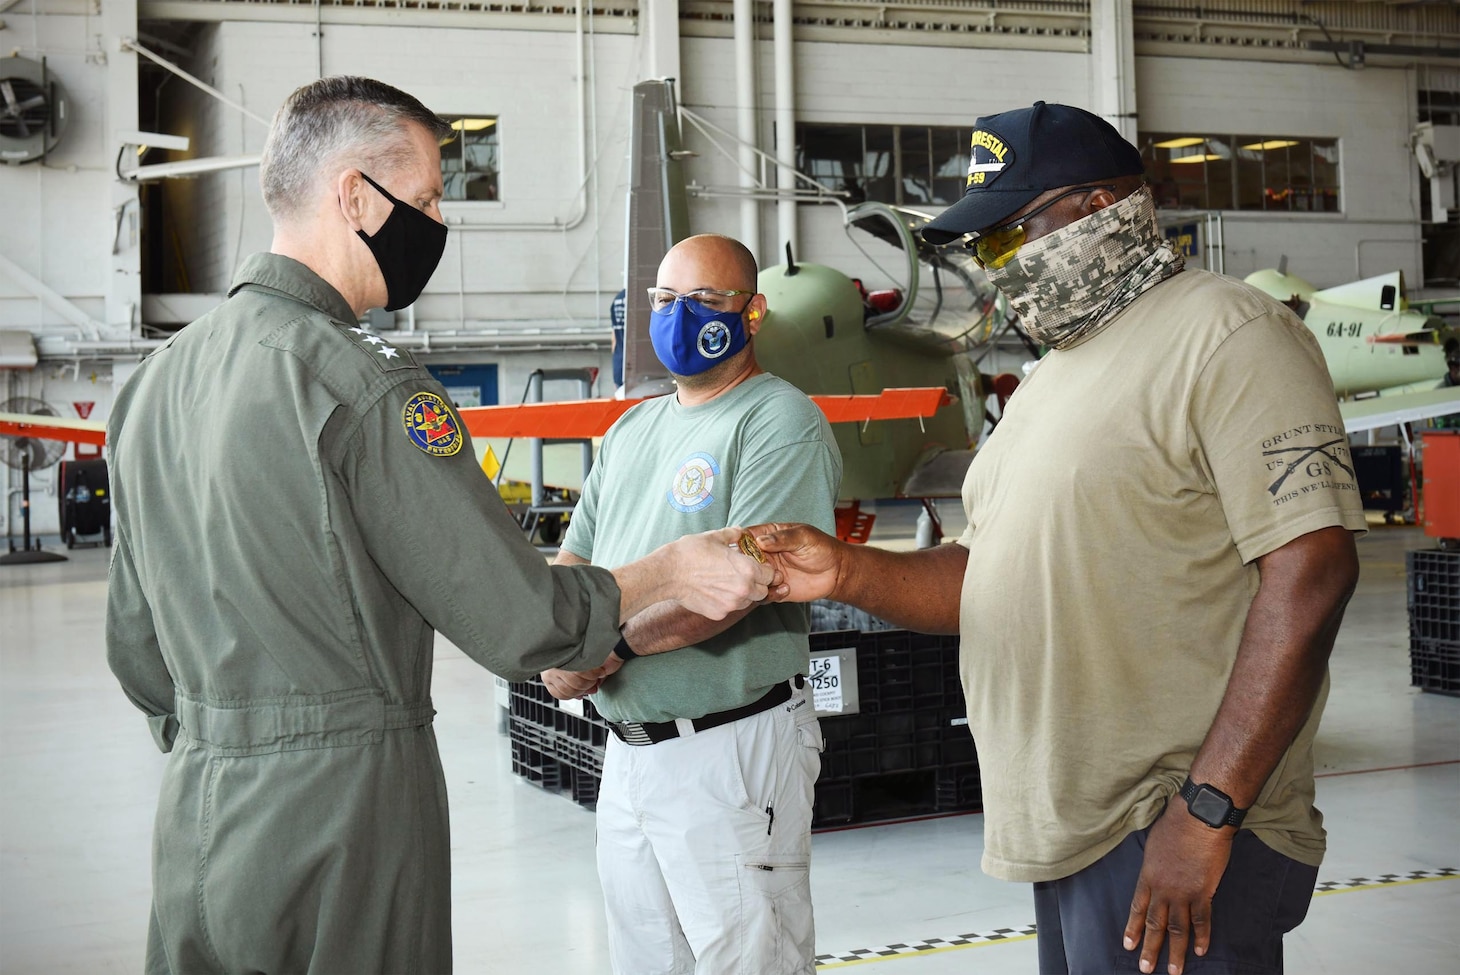 210429-N-DG679-023 

JACKSONVILLE, Fla. (April 29, 2021) During Fleet Readiness Center Southeast’s (FRCSE) Micro Boots on the Ground event, Vice Adm. Dean Peters, commander, Naval Air Systems Command, presents coins to Thomas Fotos (left), a Trainers Production Line Work Leader for T-6 aircraft and Danny Carlisle (right), a Trainers Production Line Work Leader for T-44 aircraft, Apr. 29, 2021. Presenting coins is a customary military practice that acknowledges a person’s outstanding contributions to the mission. (U.S. Navy Photo by Toiete Jackson/Released)